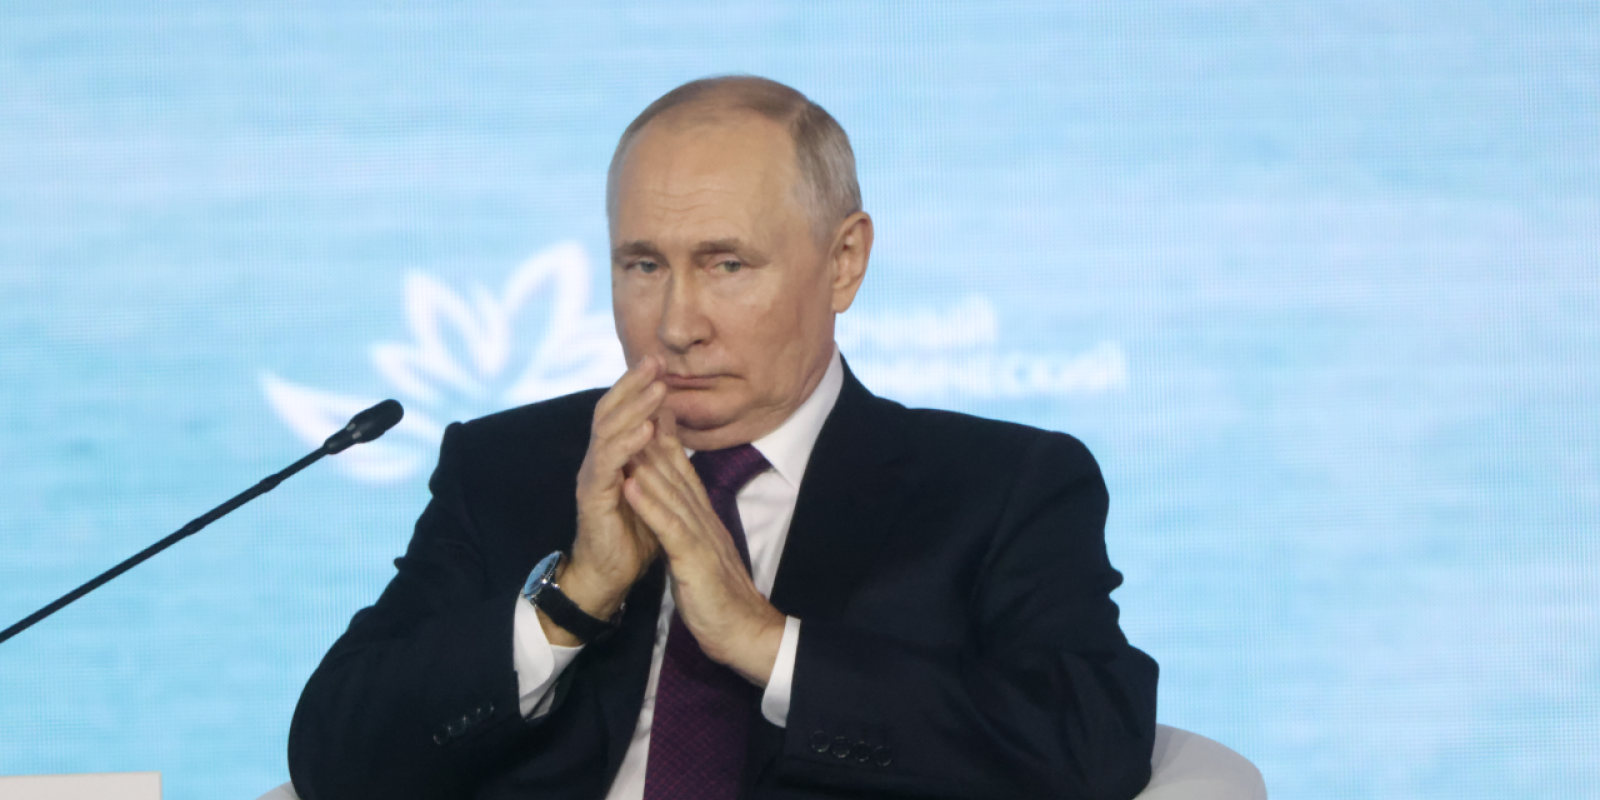 Putin says 'Wagner does not exist' after meeting Prigozhin – POLITICO